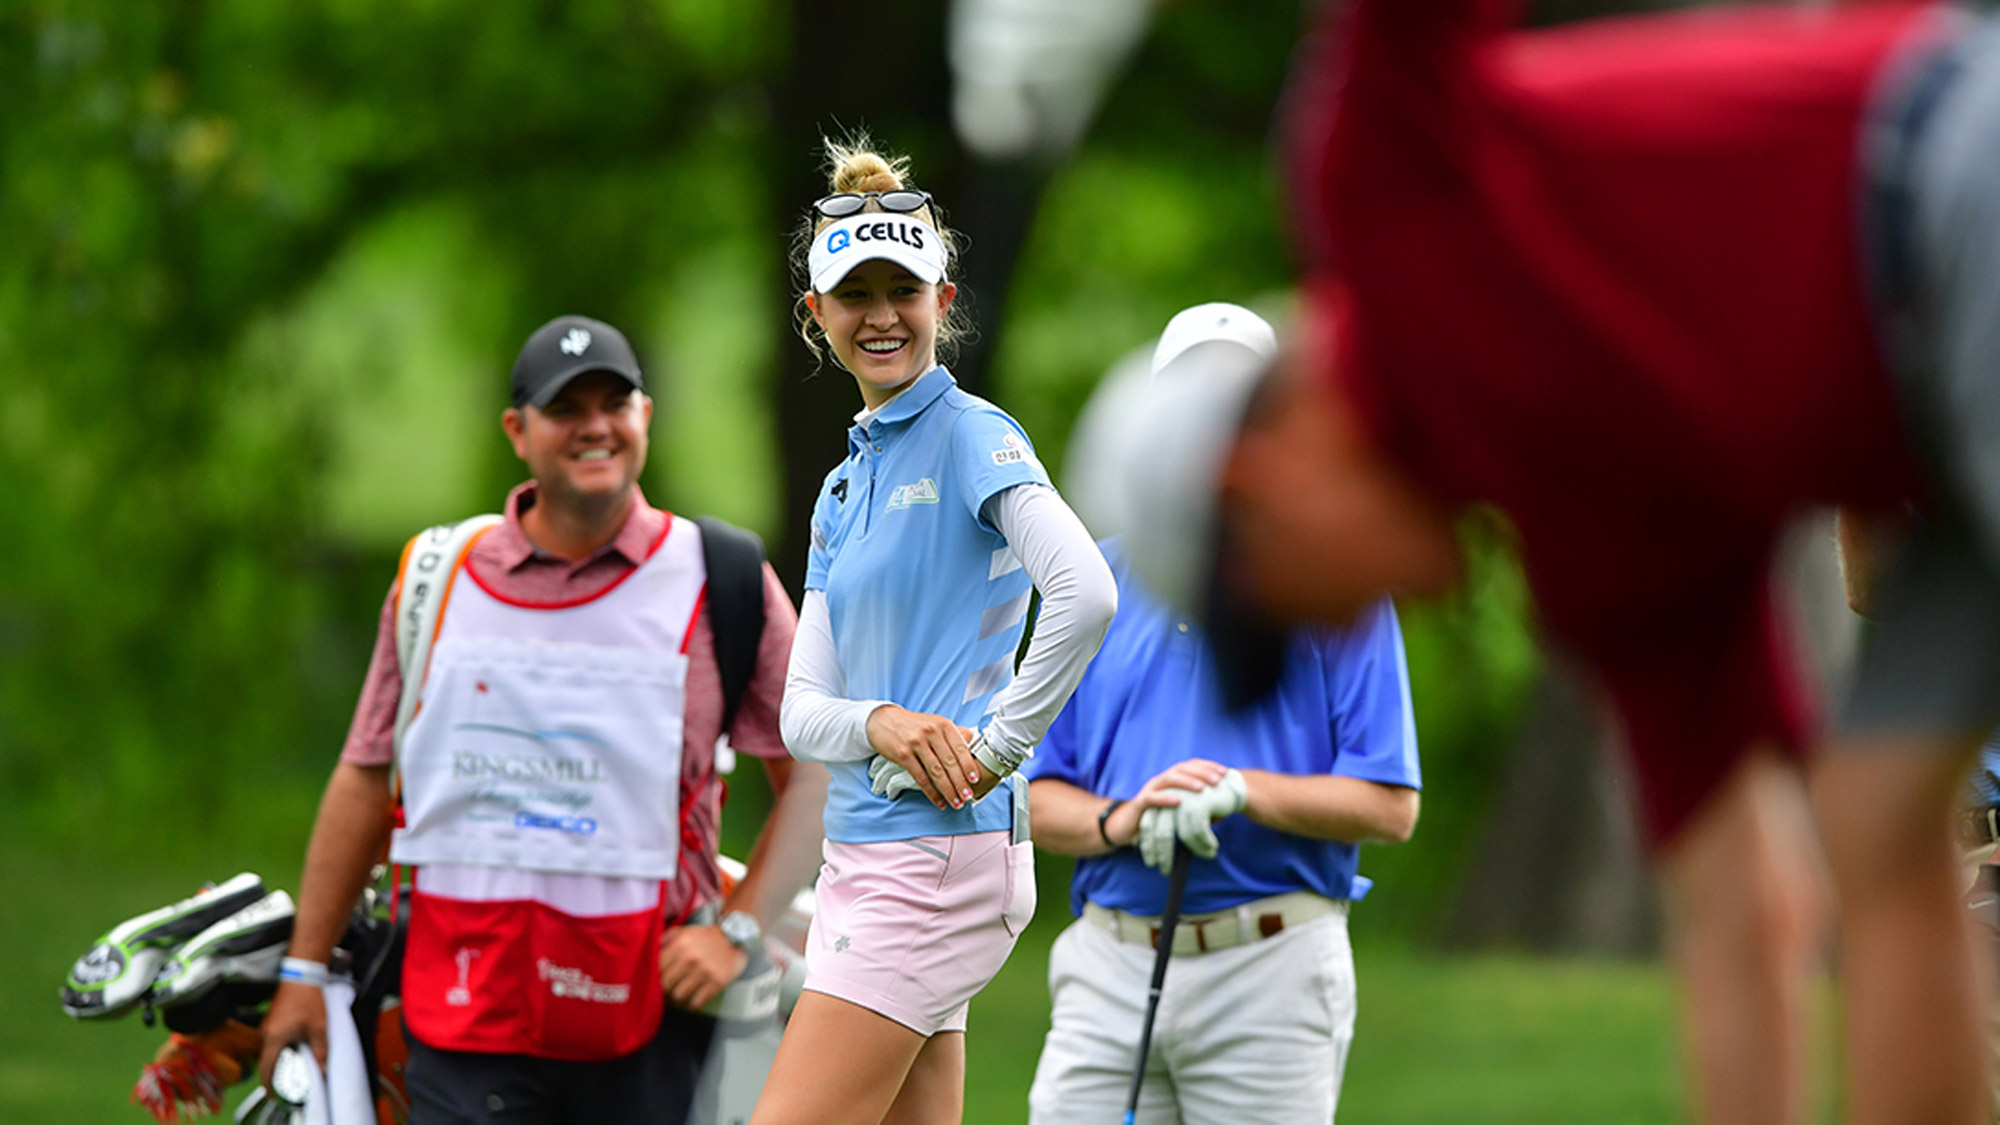 Nelly Korda Smiling During the Pro-Am in Virginia